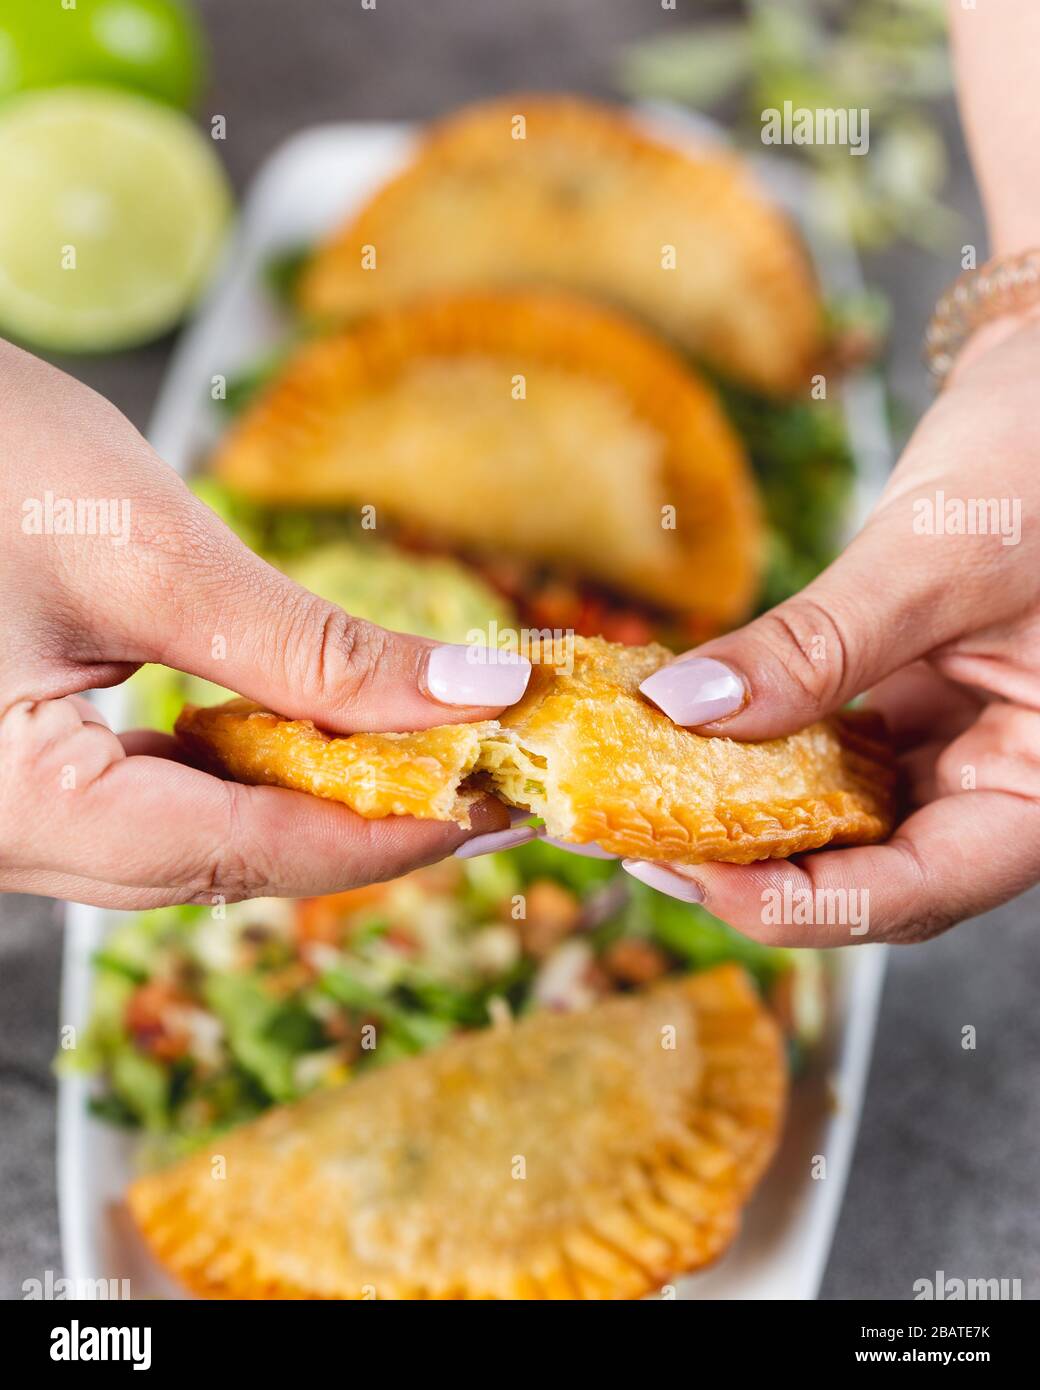 Young woman with pretty nails breaks open a fresh empanada over a plate of empanadas Stock Photo